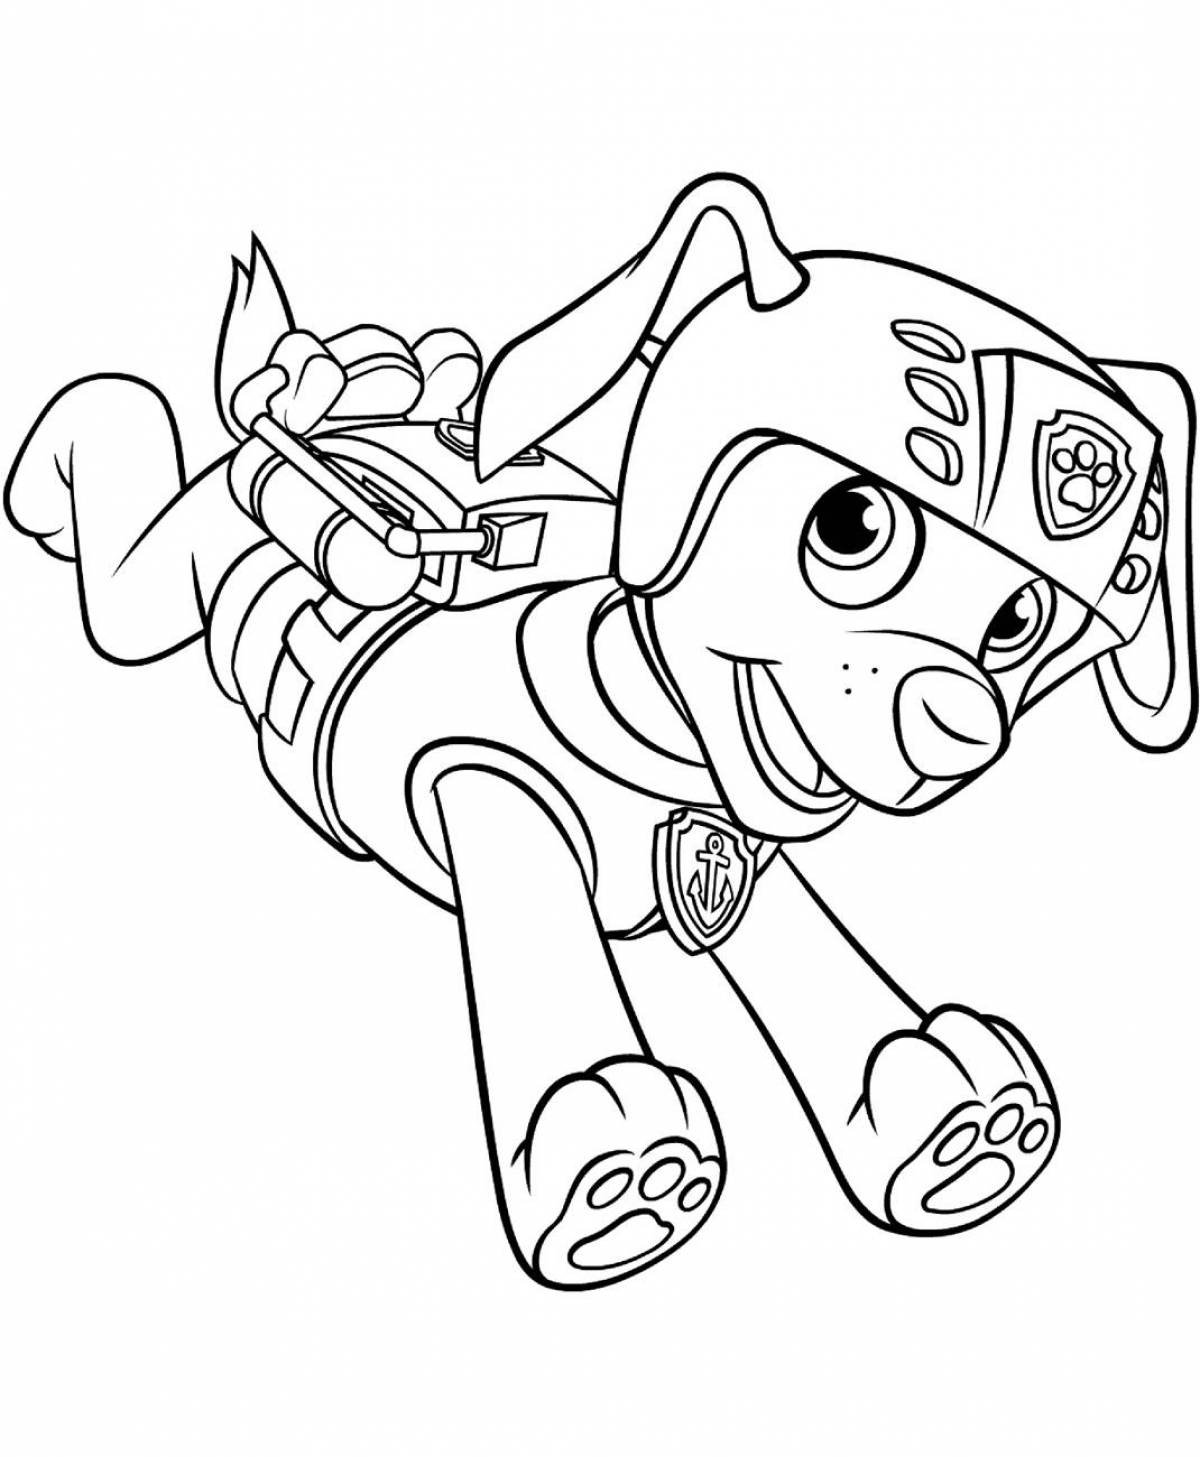 Rocky paw patrol dazzling coloring book